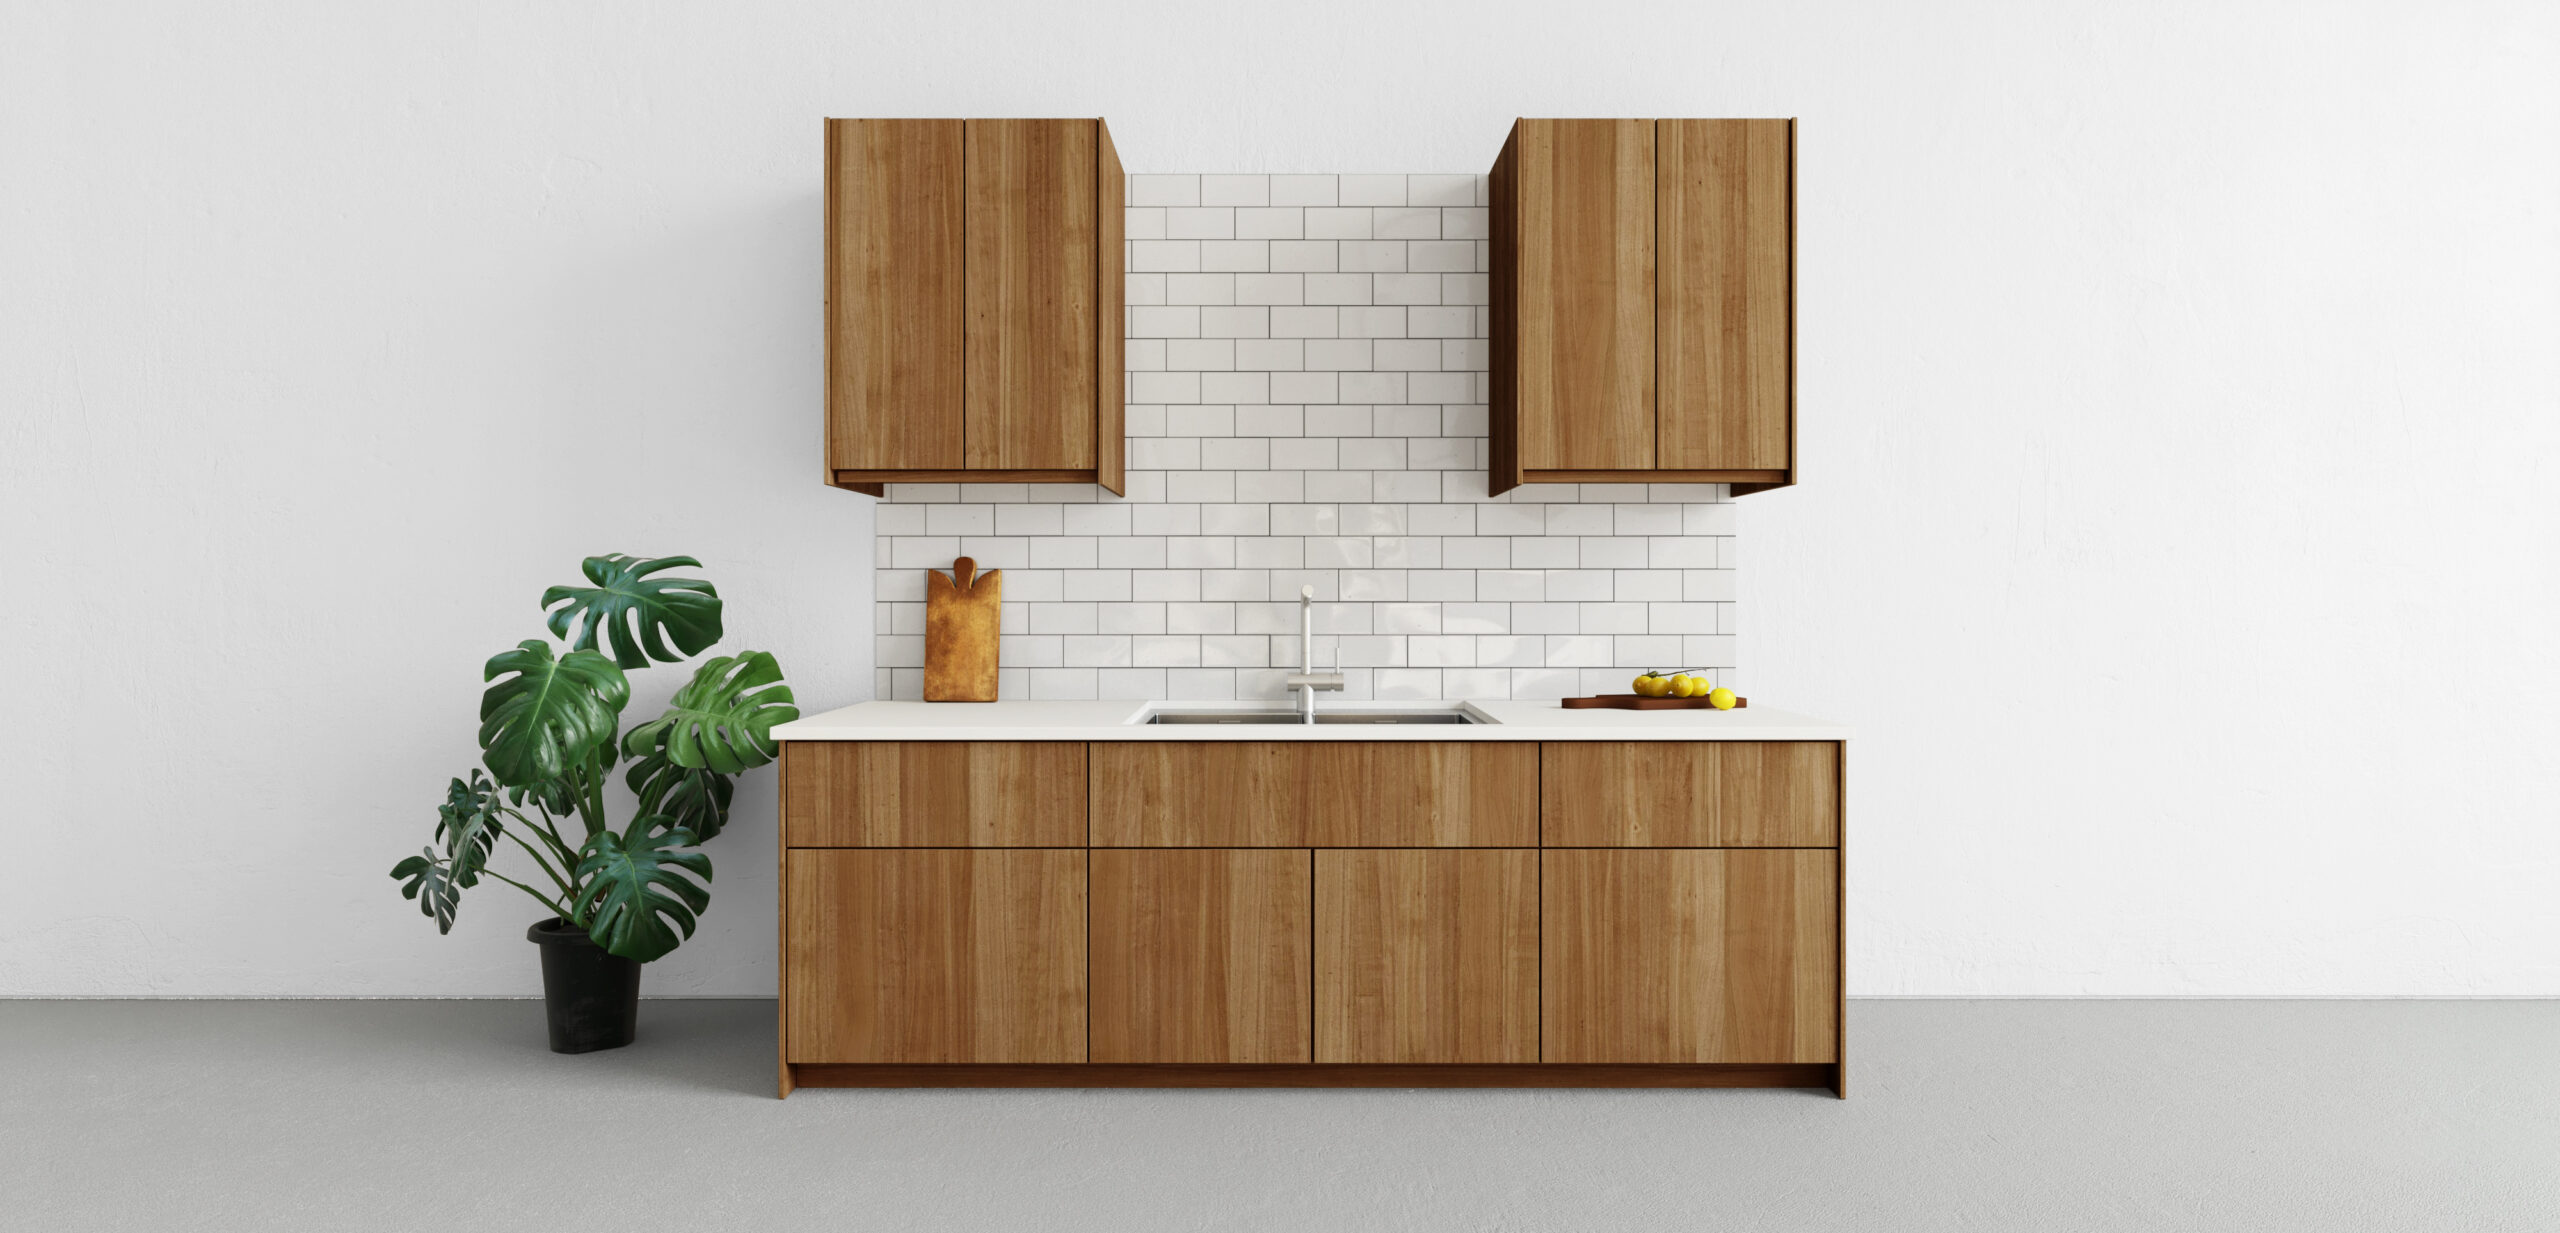 Rendering of a small wood kitchen